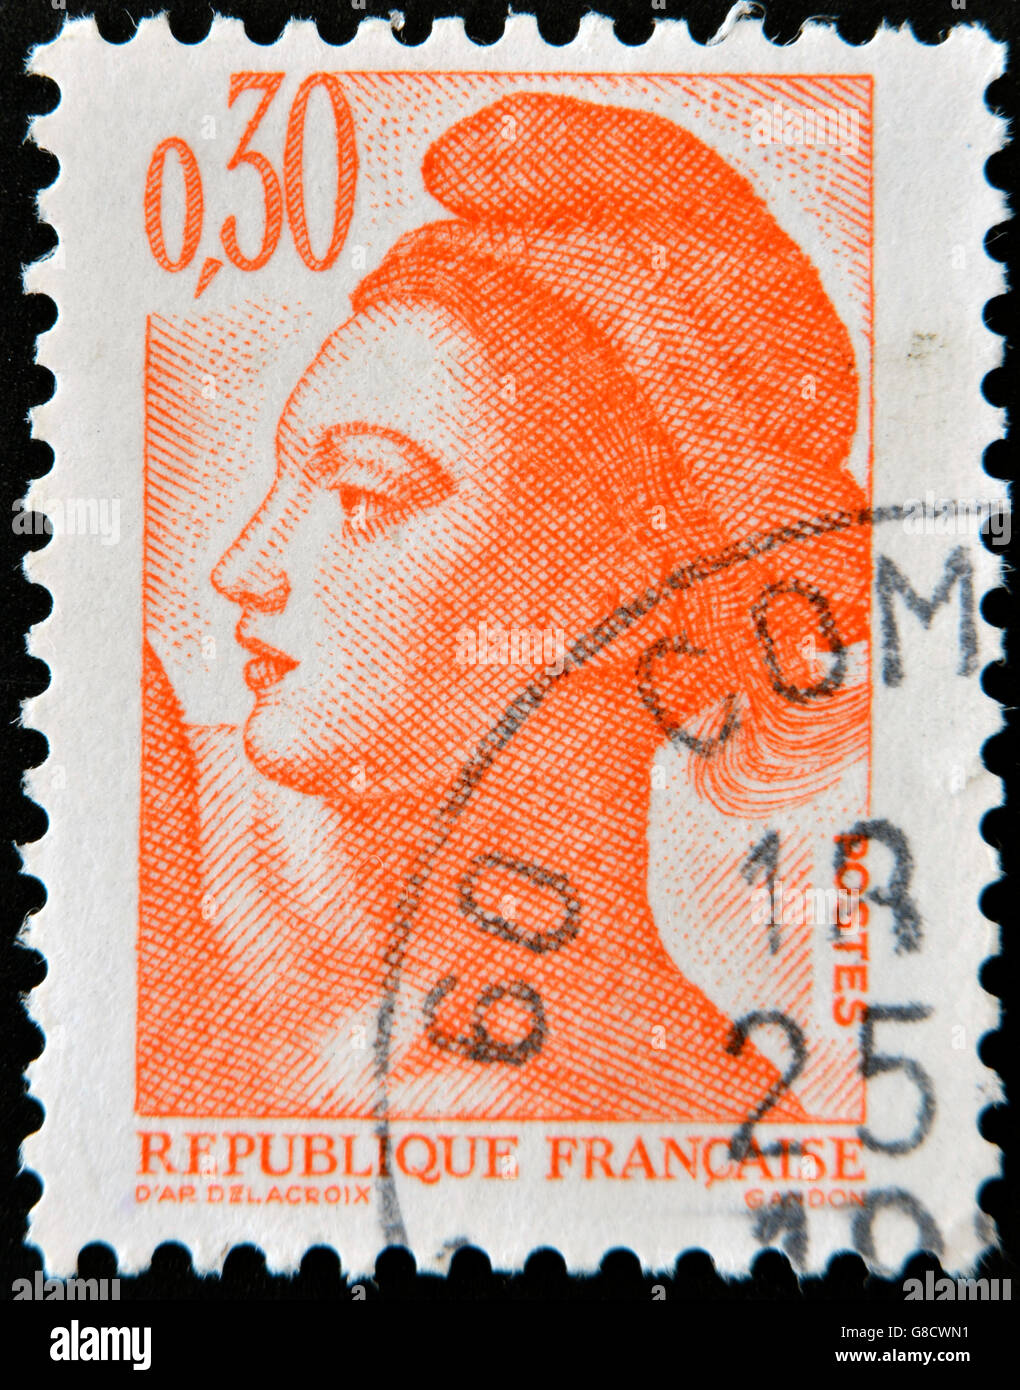 FRANCE - CIRCA 1982: A stamp printed in France shows 'Freedom' Eugene Delacroix's painting The 'Liberty Leading the People', cir Stock Photo